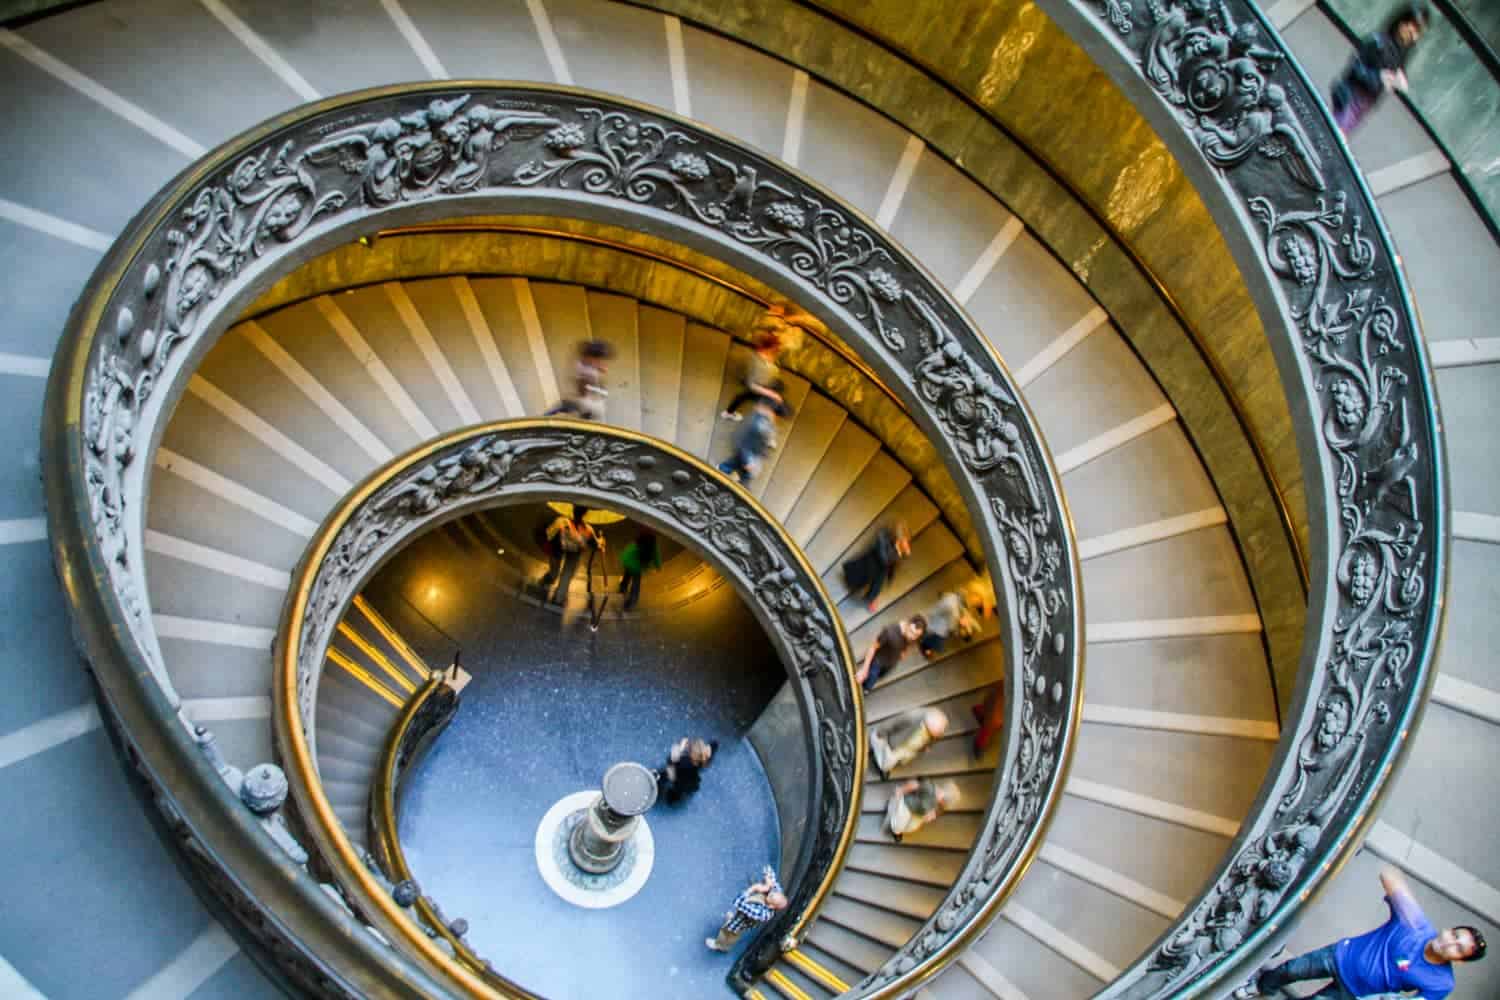 Vatican Museum Spiral Staircase, Rome